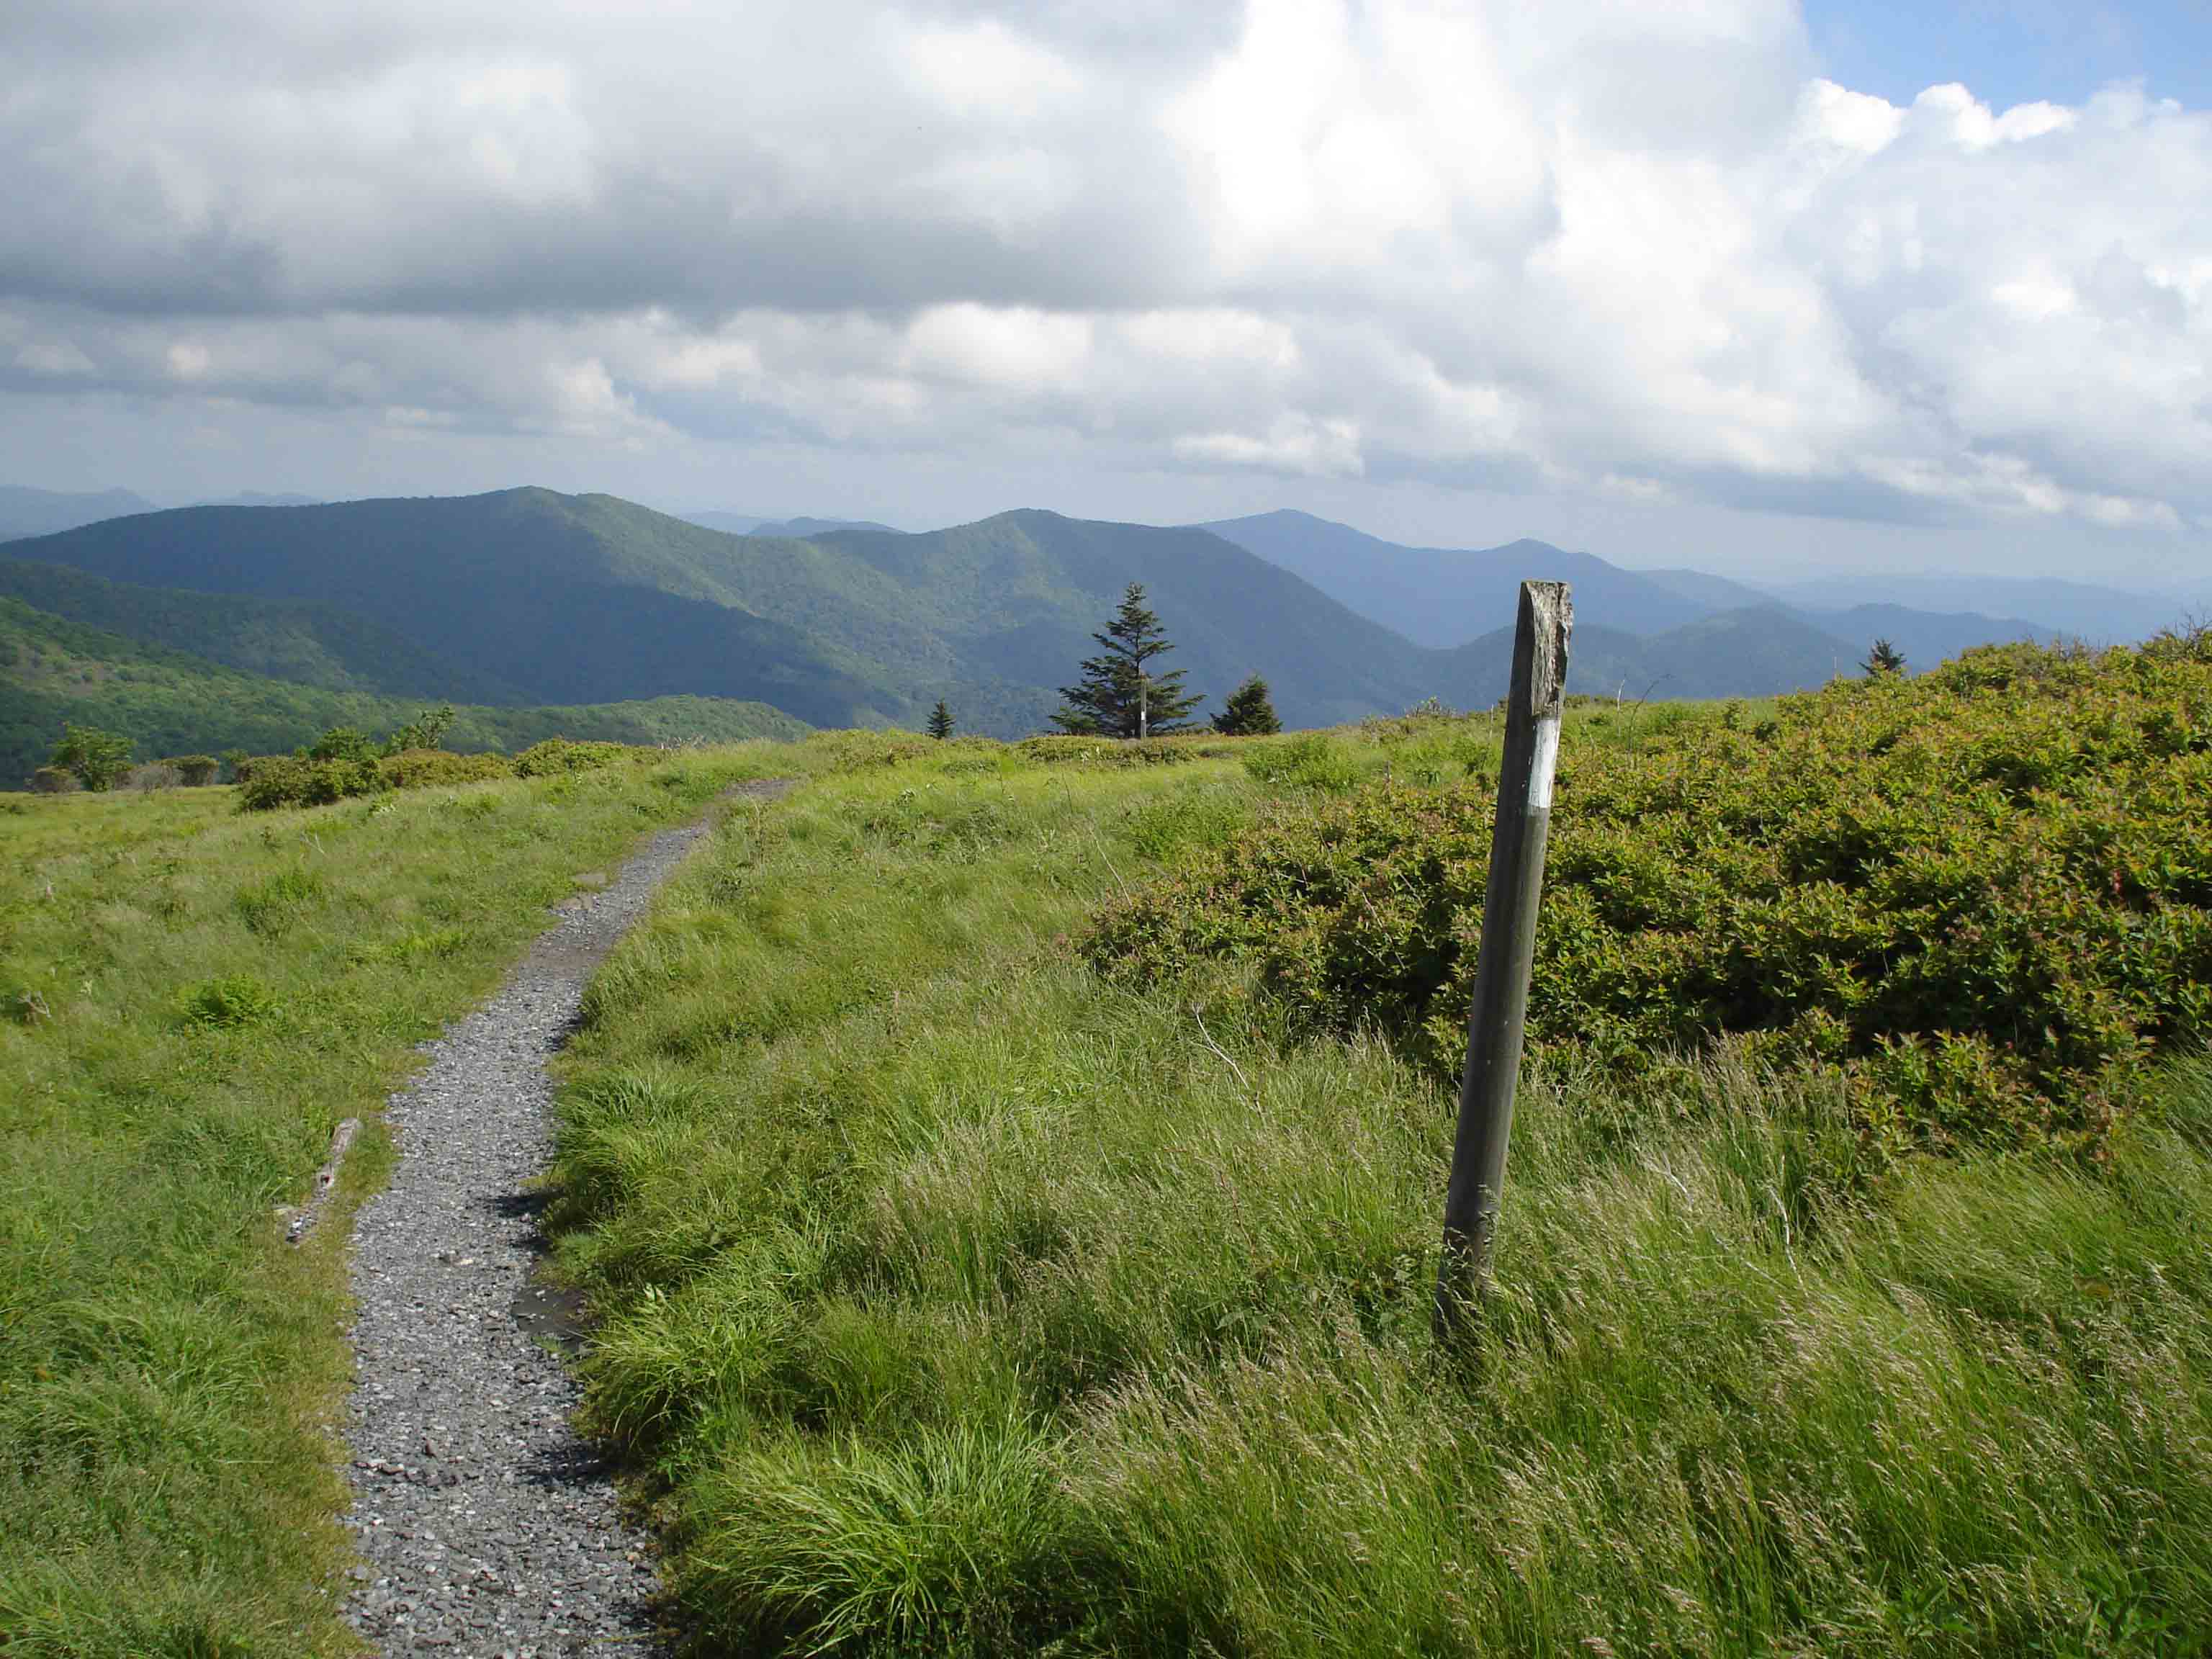 mm 13.5 Round Bald near Roan Mountain- looking south  Courtesy gstrine@embarqmail.com